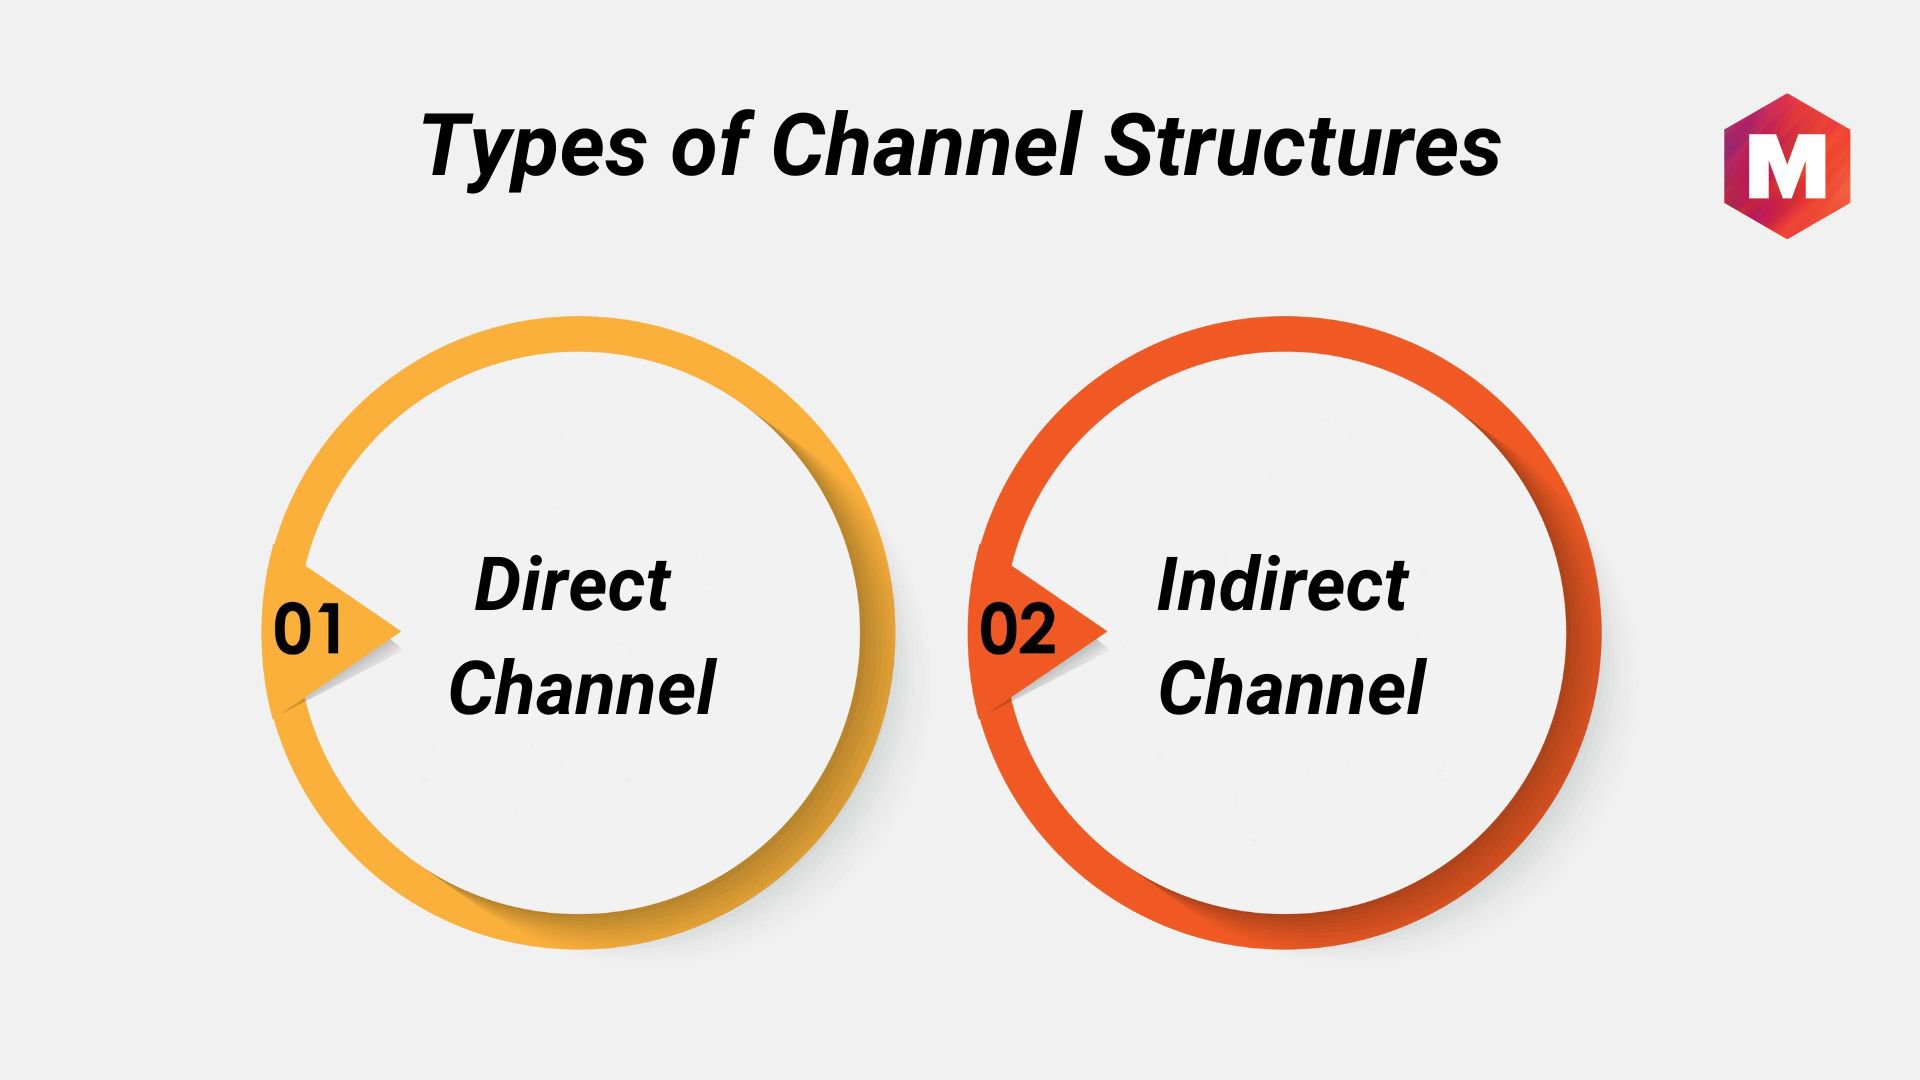 features of effective distribution channel design